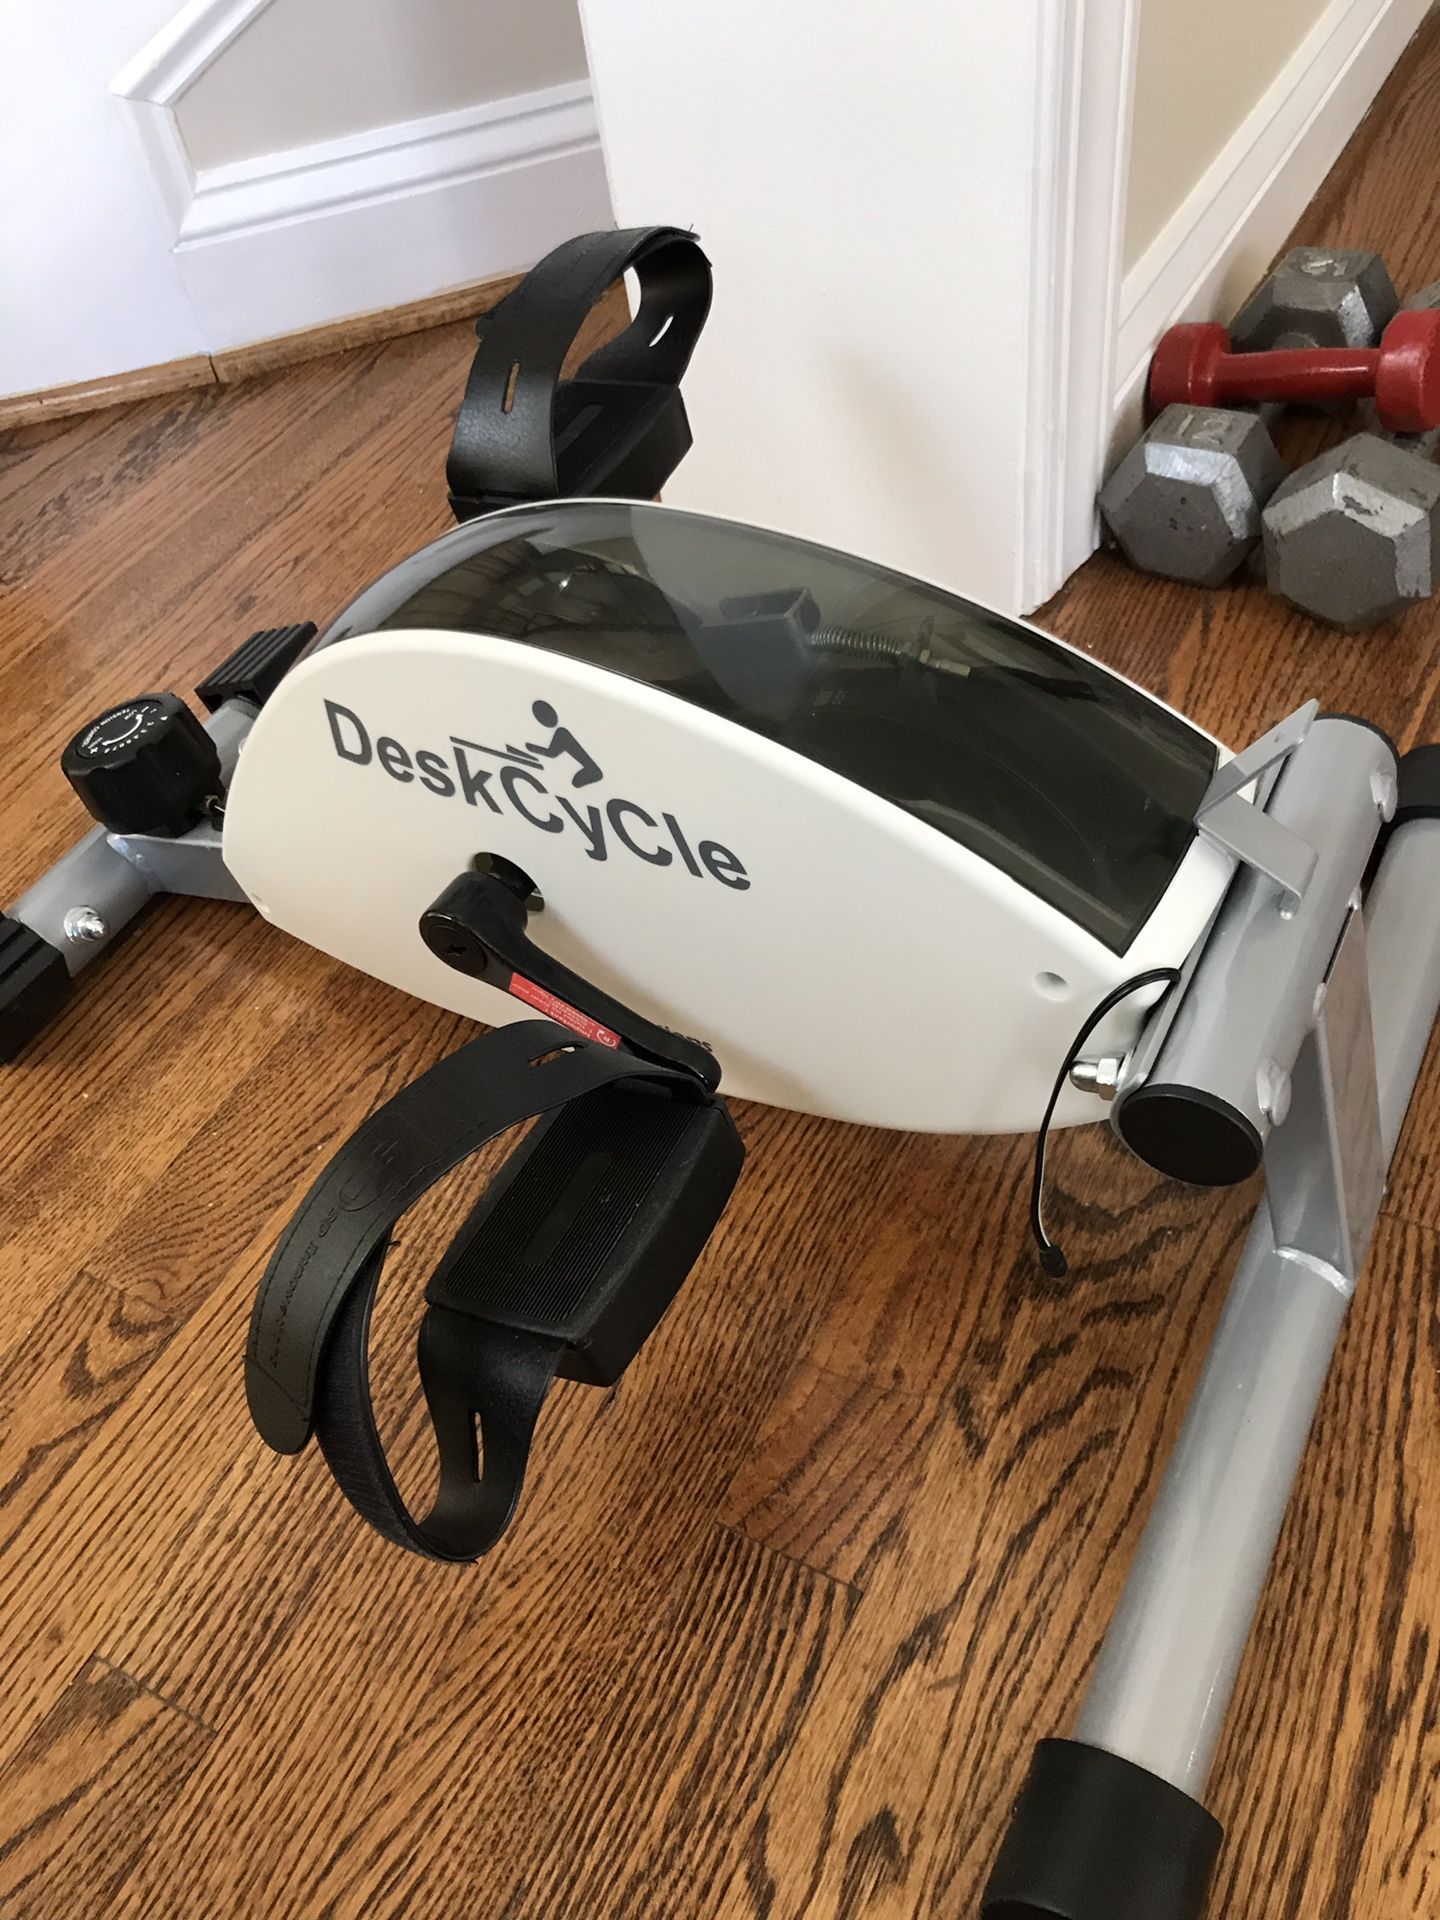 DeskCycle - Exercise bike for the workplace